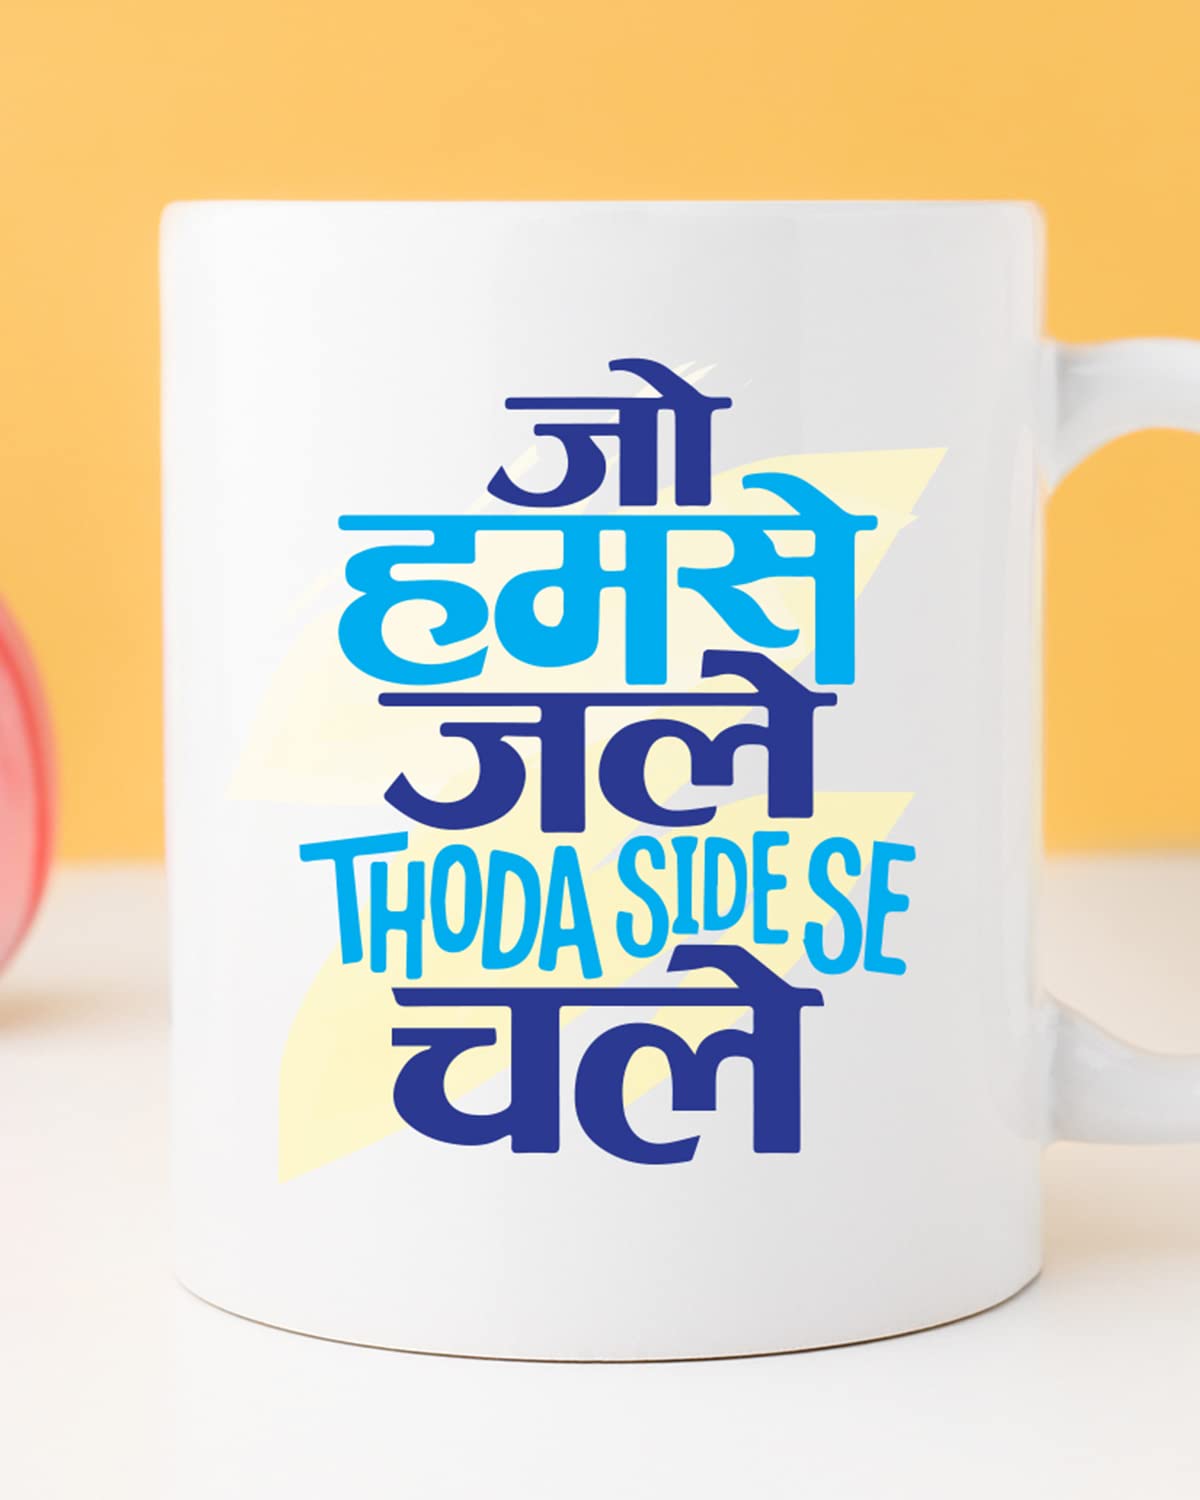 JO HUMSE CHALE Coffee Mug - Gift for Friend, Birthday Gift, Birthday Mug, Motivational Quotes Mug, Mugs with Funny & Funky Dialogues, Bollywood Mugs, Funny Mugs for Him & Her